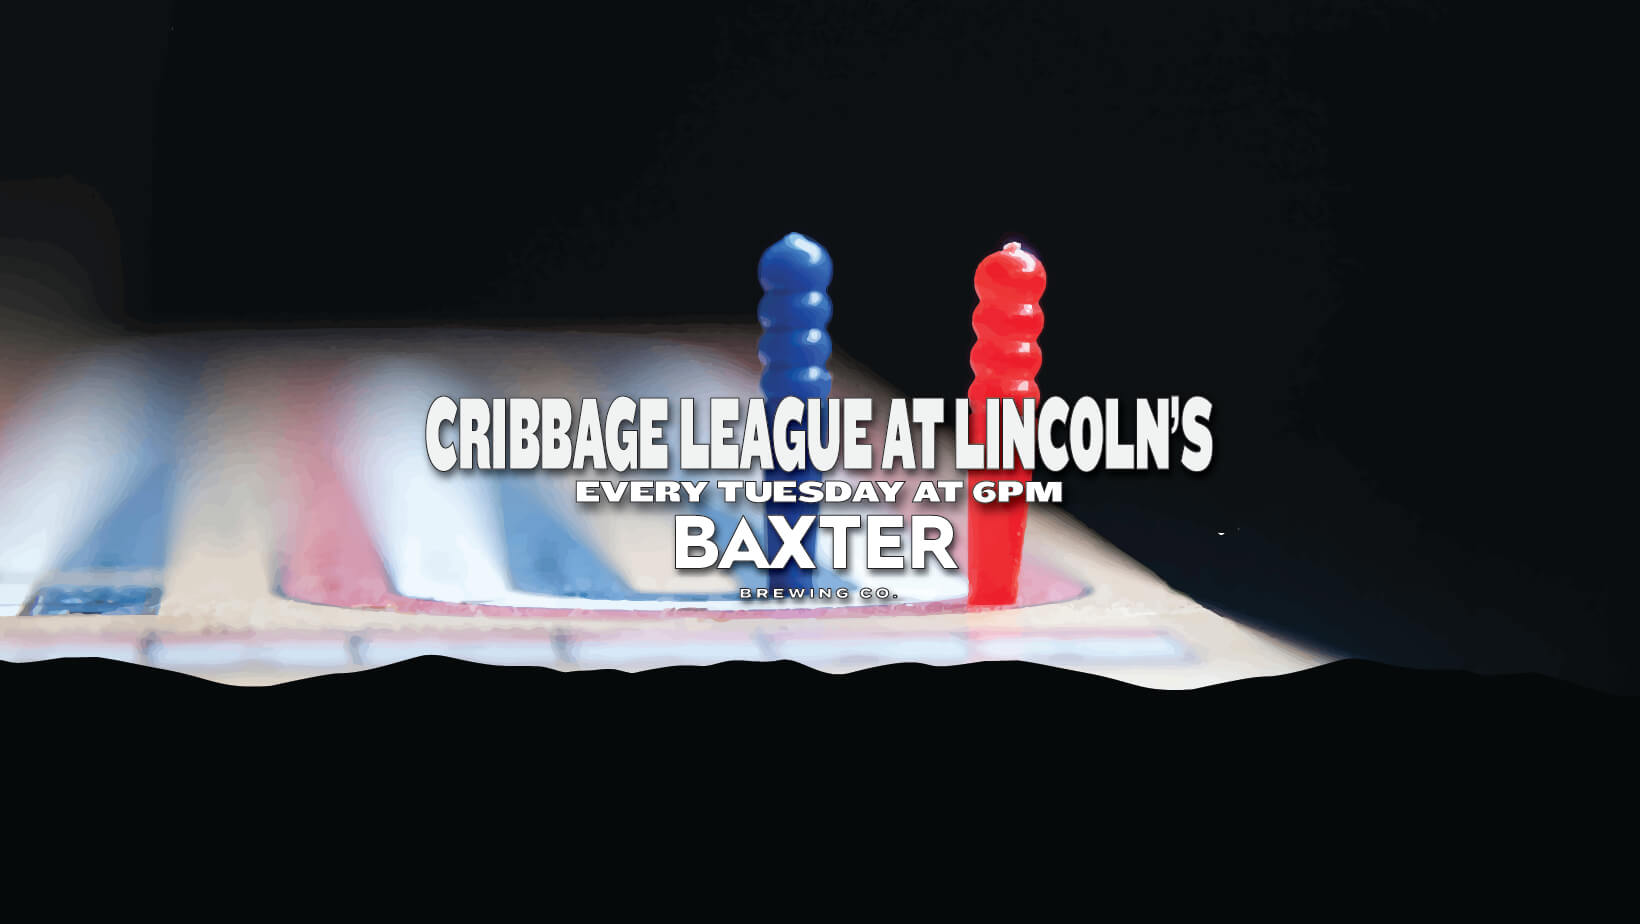 image promoting cribbage night at lincoln's every monday night